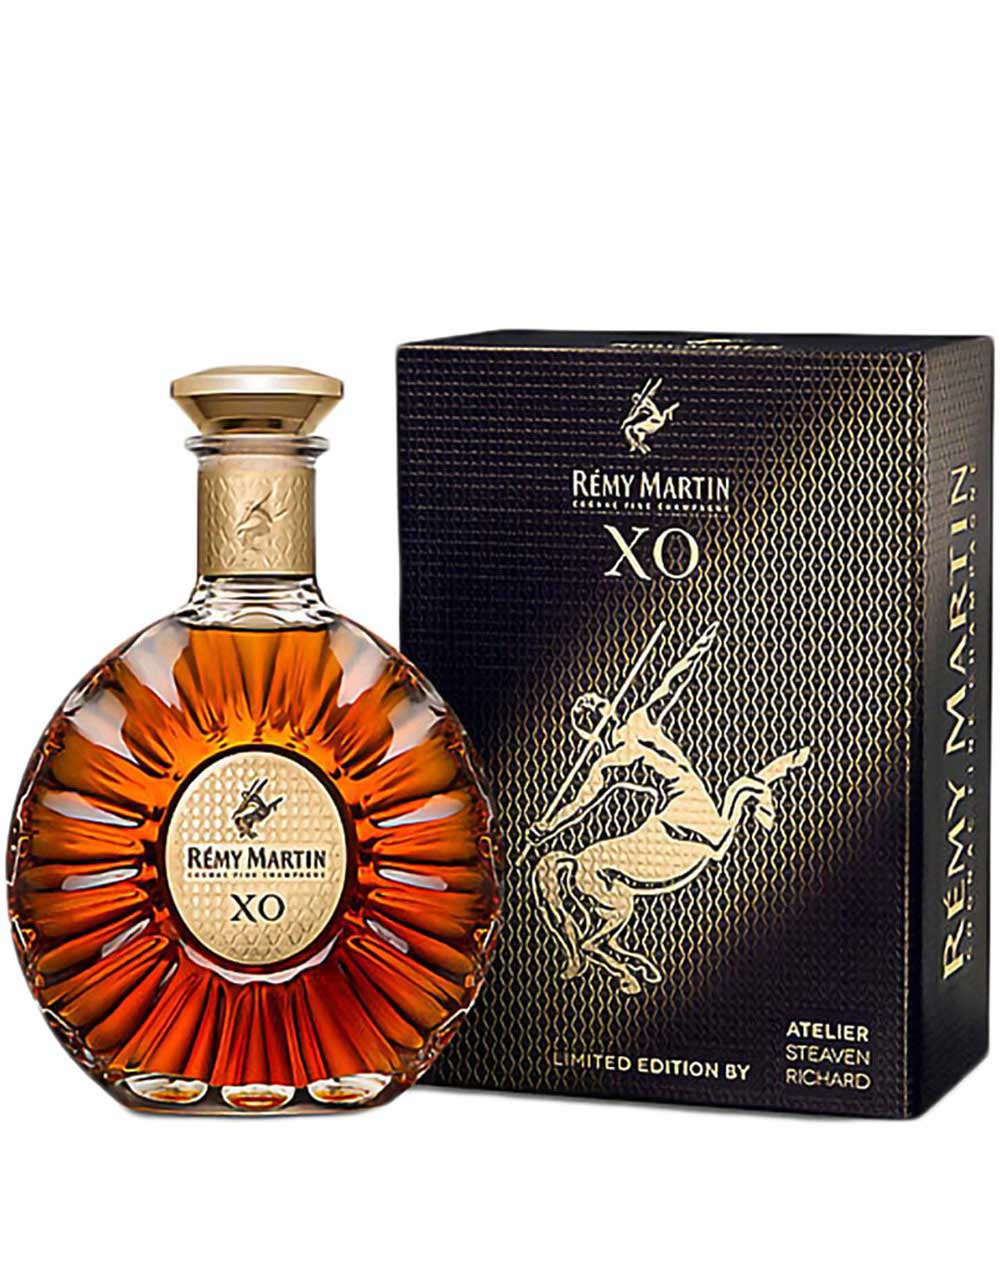 Remy Martin X.O. Limited Edition By Atelier Steaven Richard